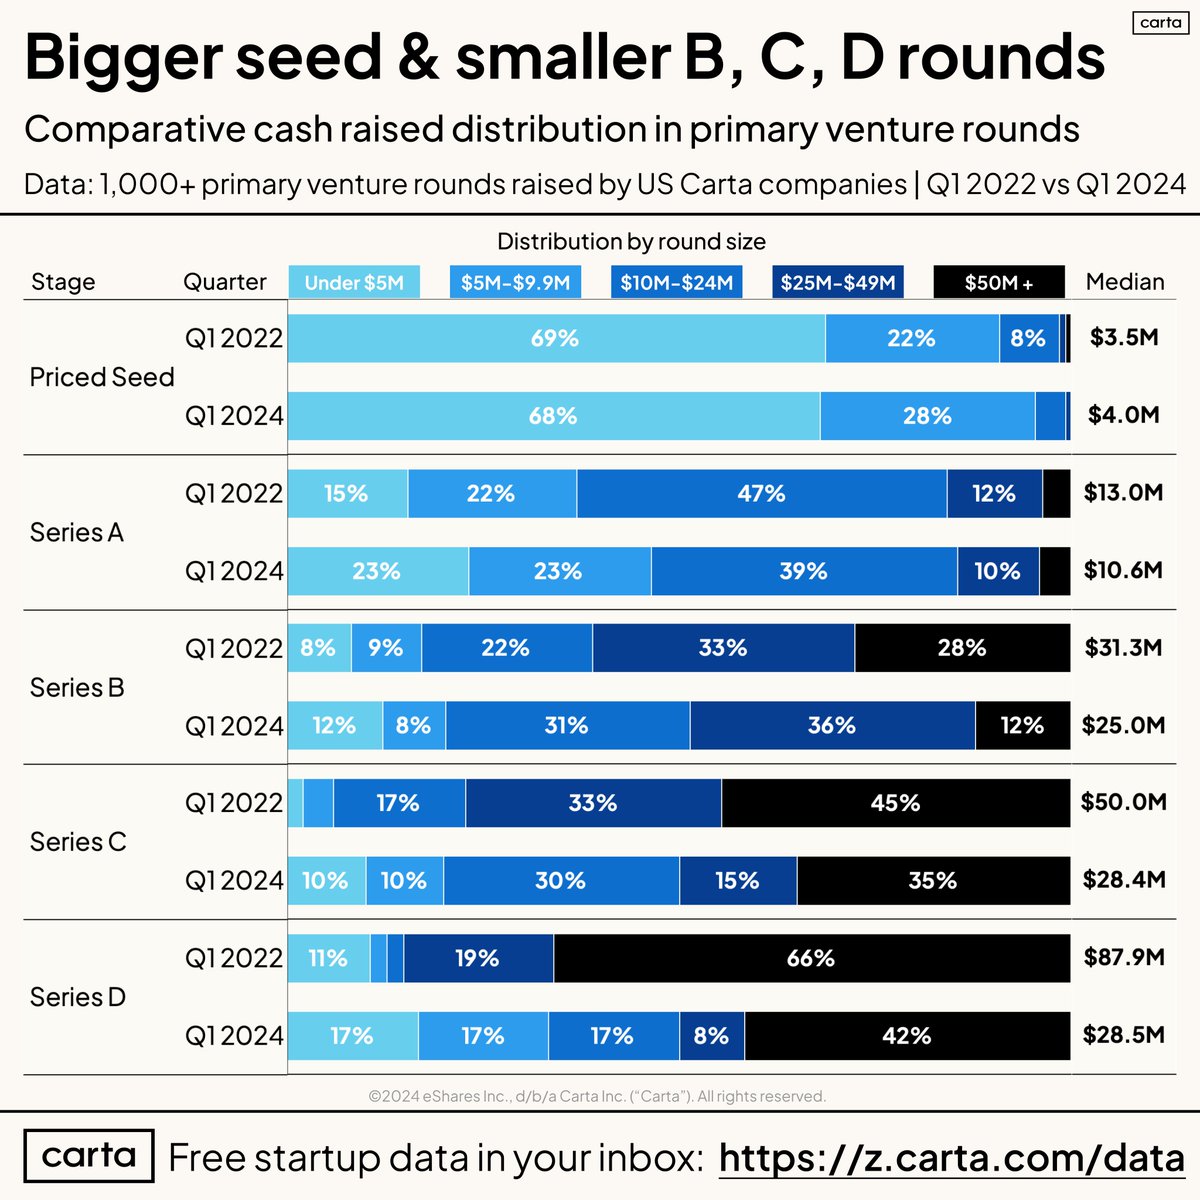 Priced seed rounds actually got bigger over the past two years, but basically every other round shrunk. Where will all the dry powder go if round sizes remain permanently smaller?